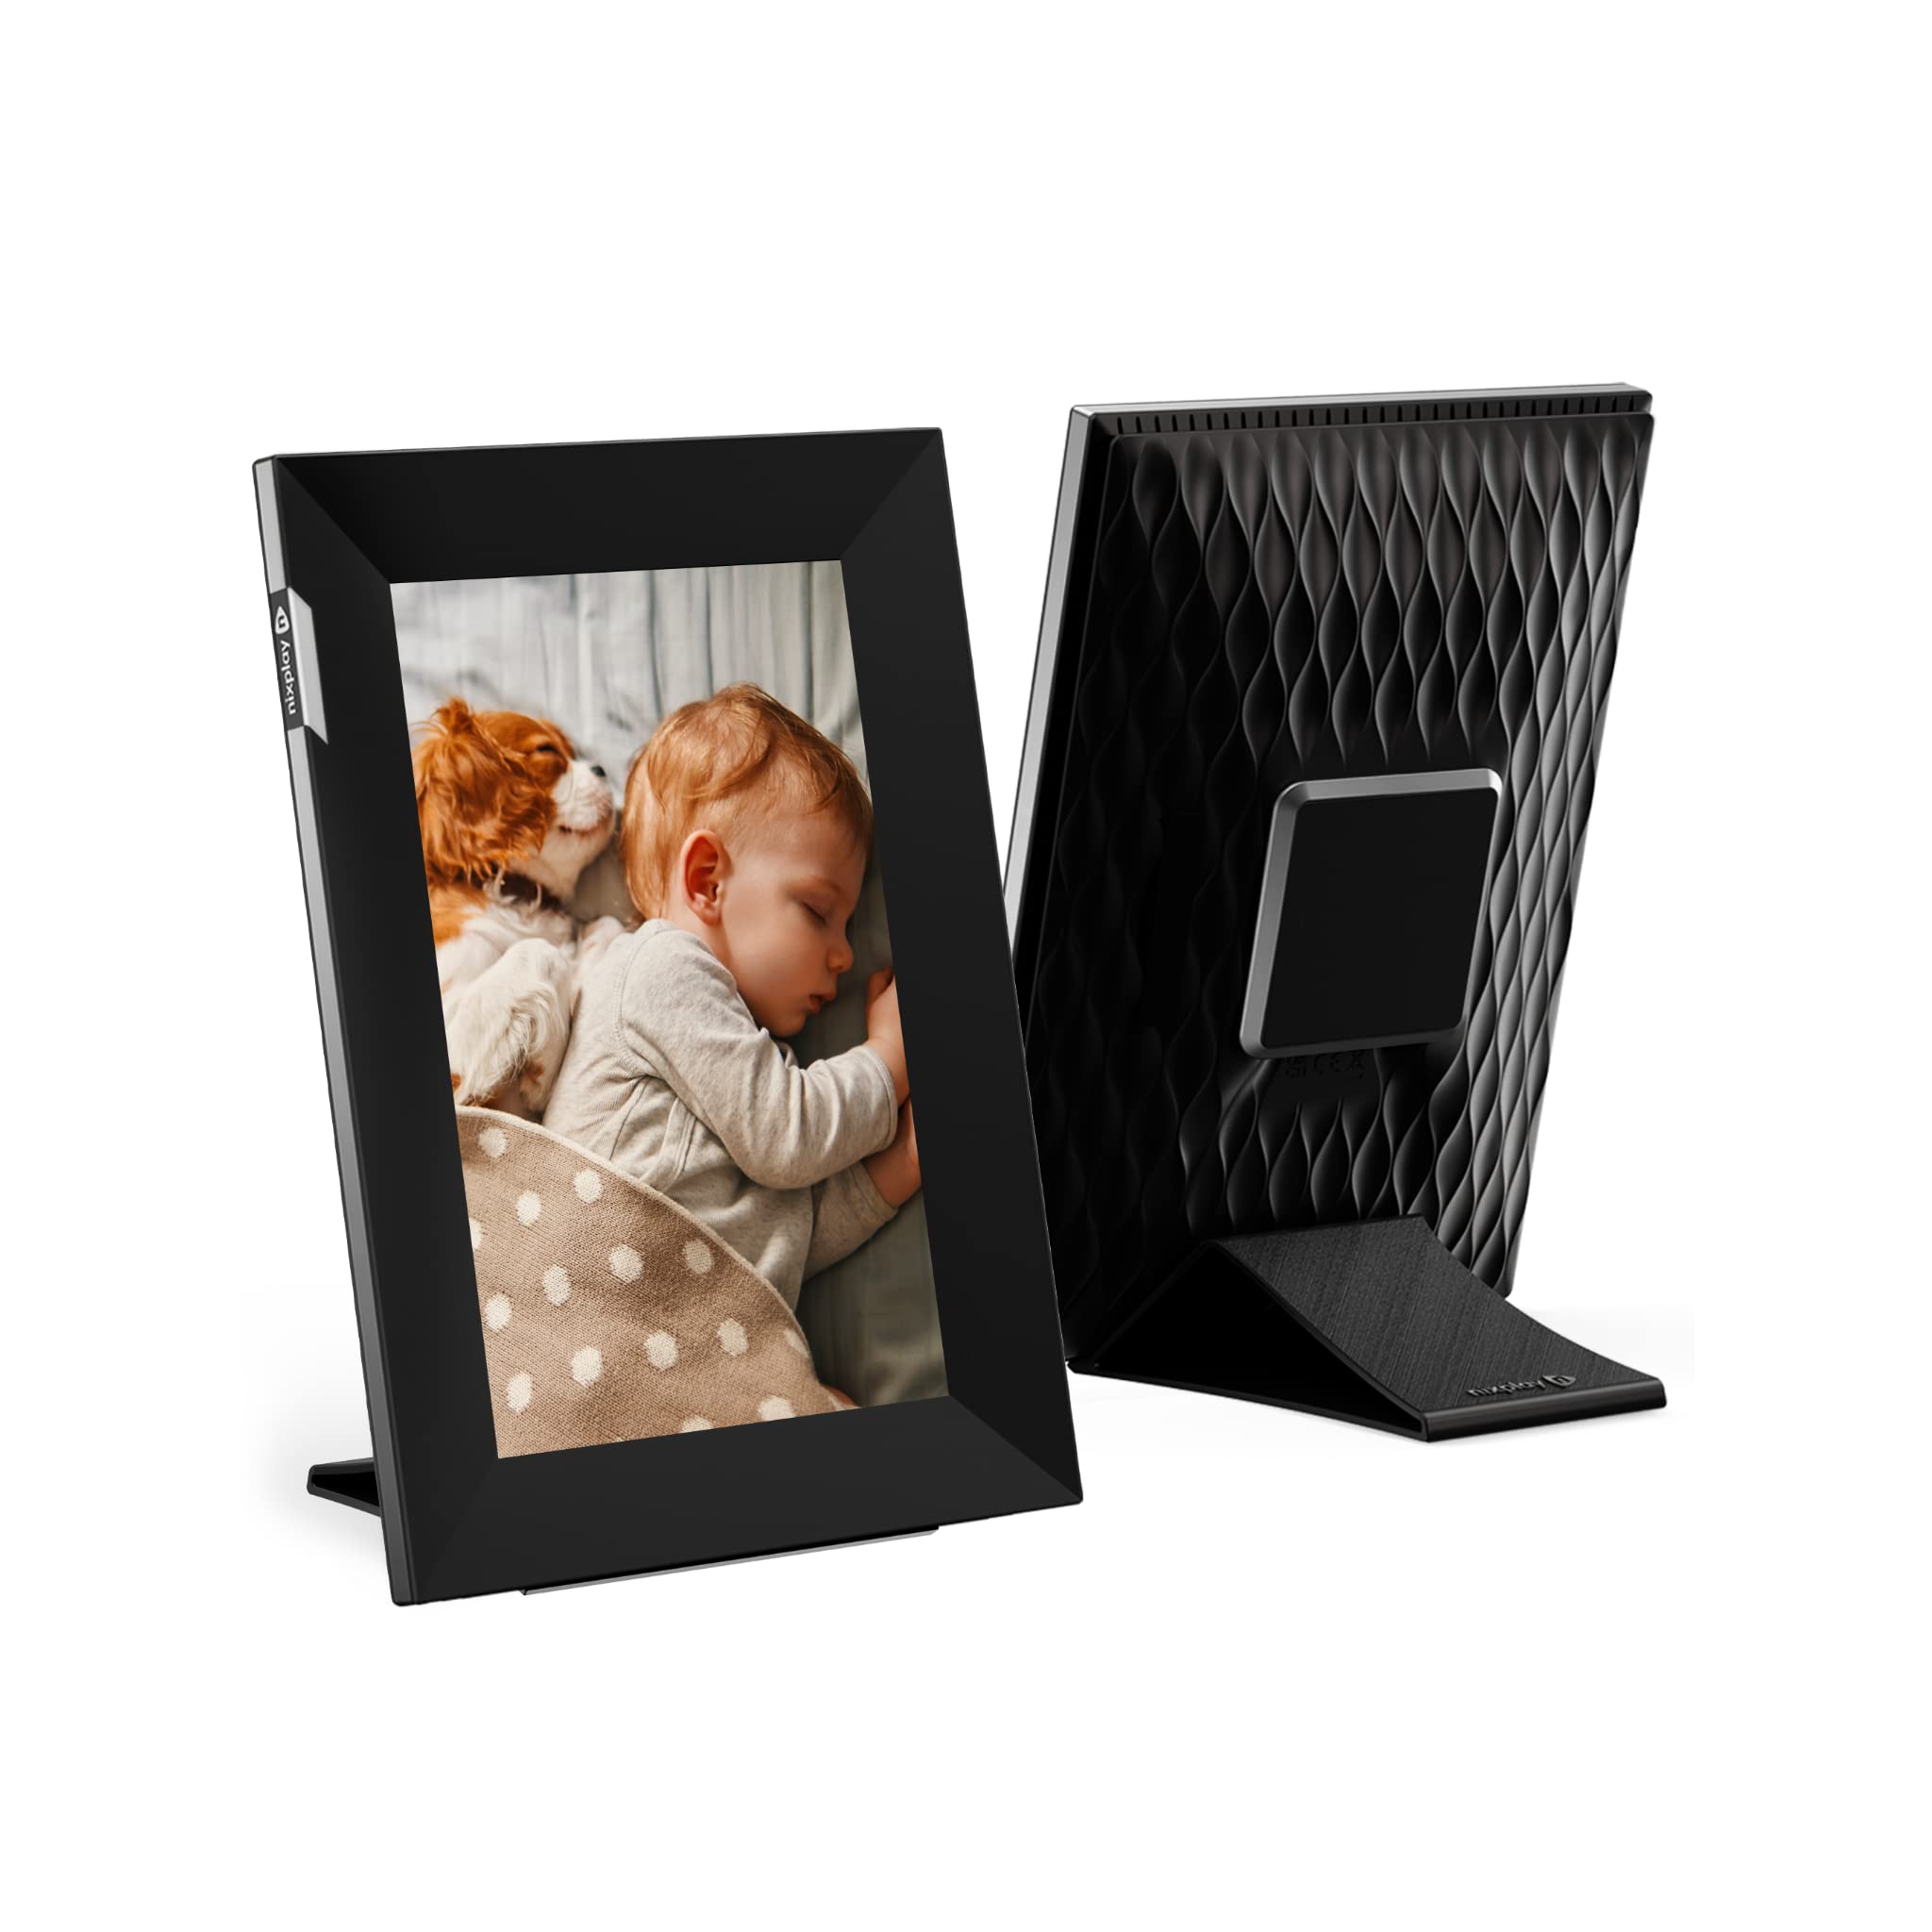 Nixplay 8 inch Touch Screen Smart Digital Picture Frame with WiFi (W08K), Black-Silver, Share Photos and Videos Instantly via Email or App